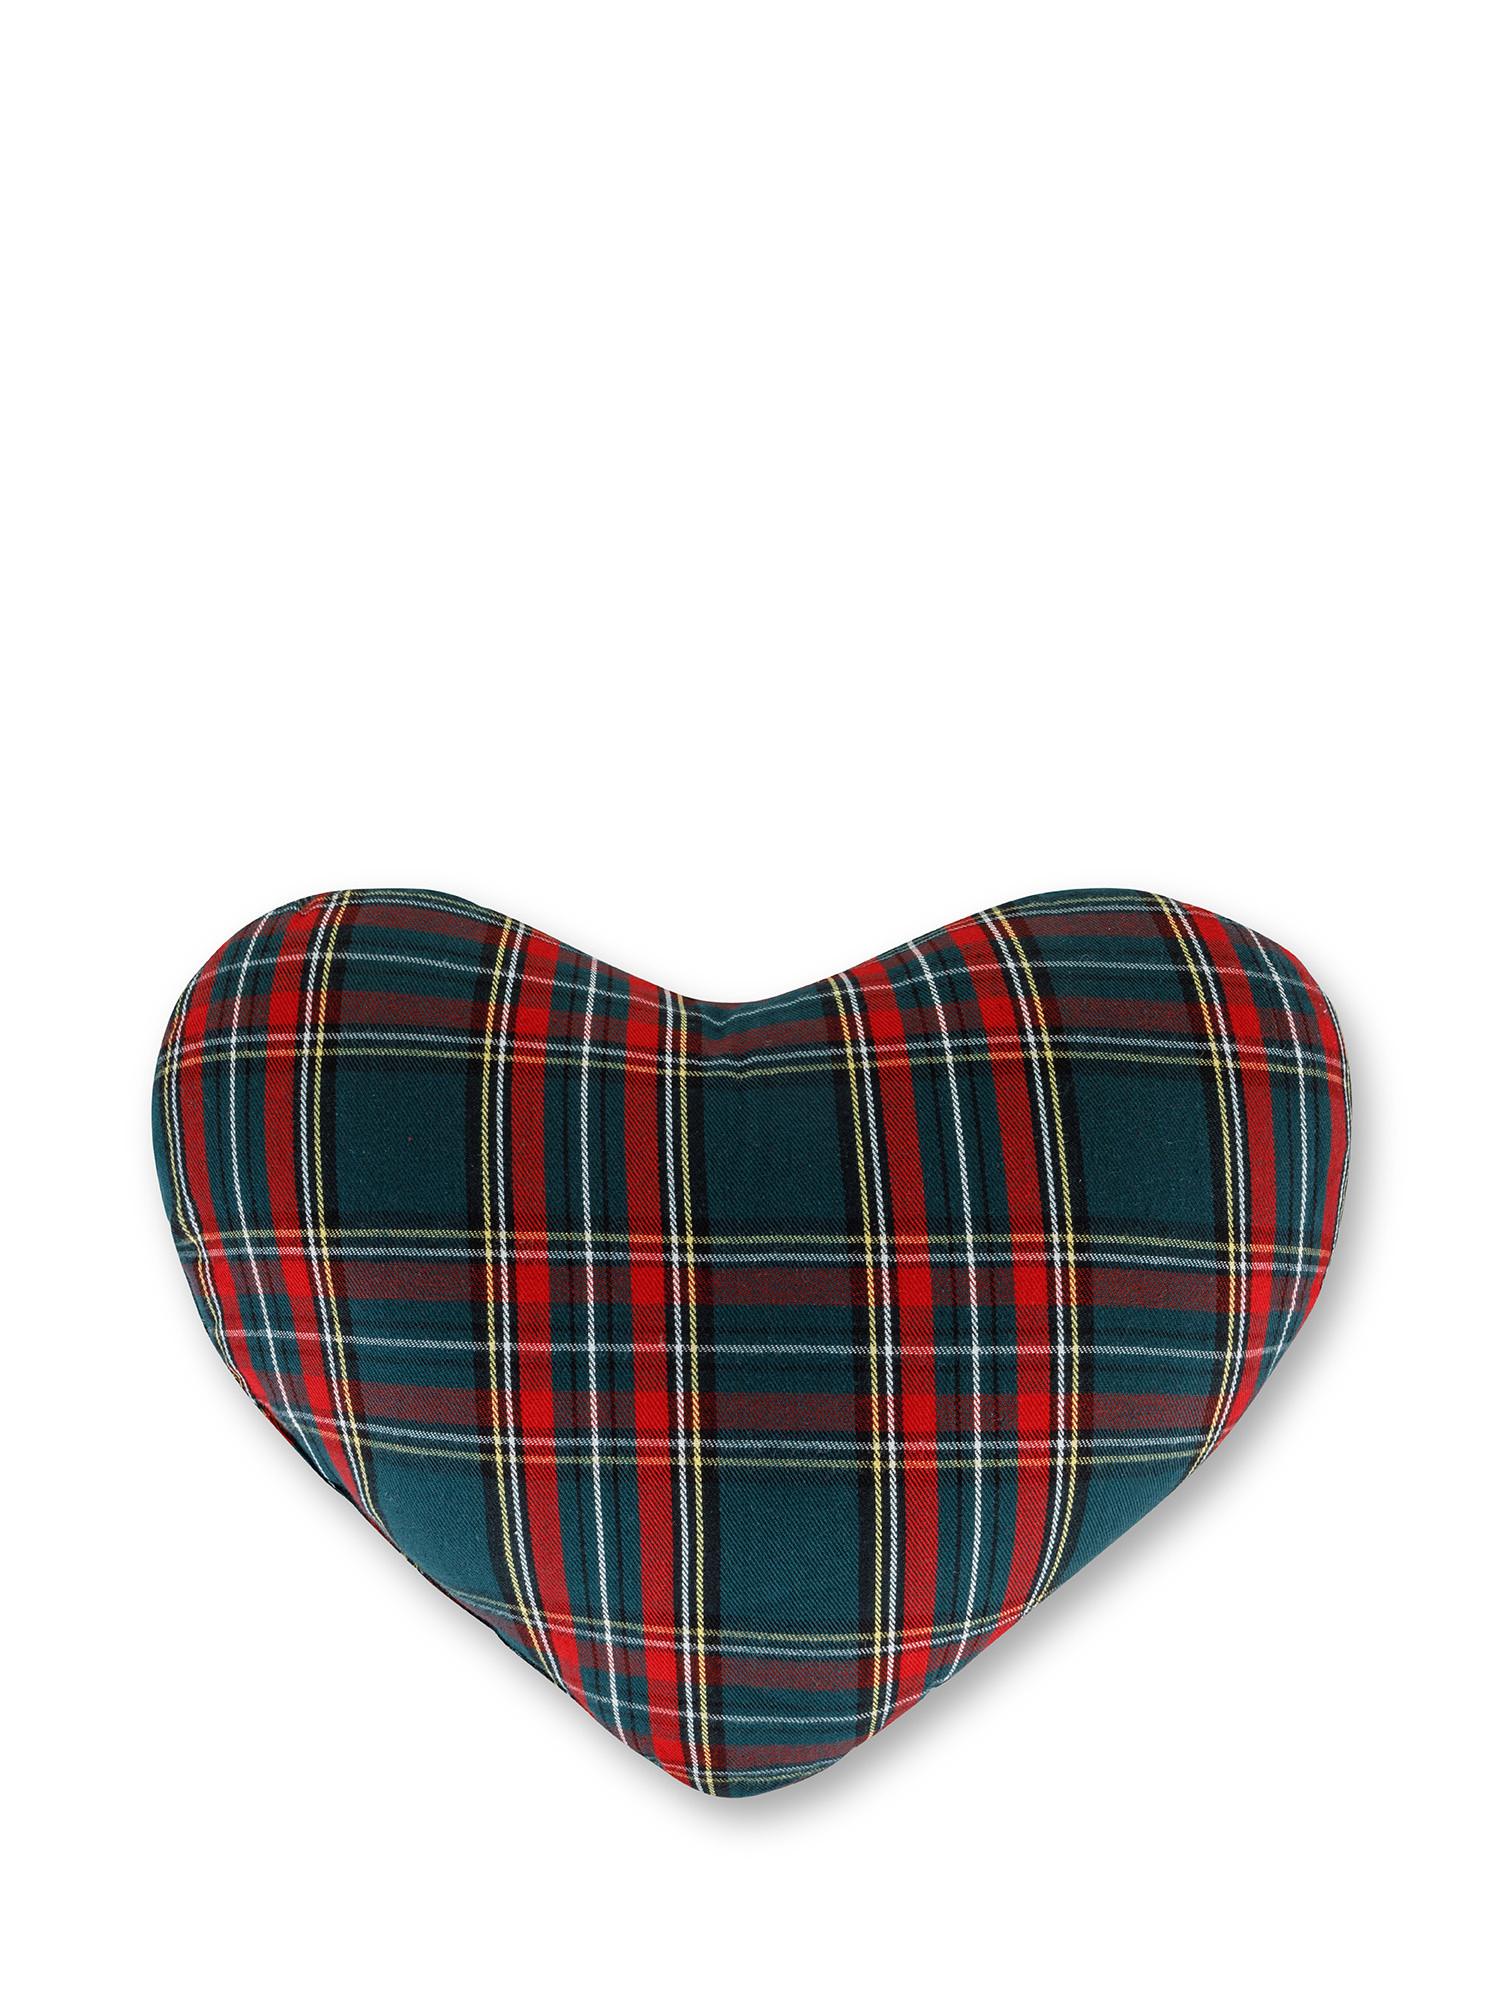 Cuscino a cuore in tartan, Verde, large image number 0